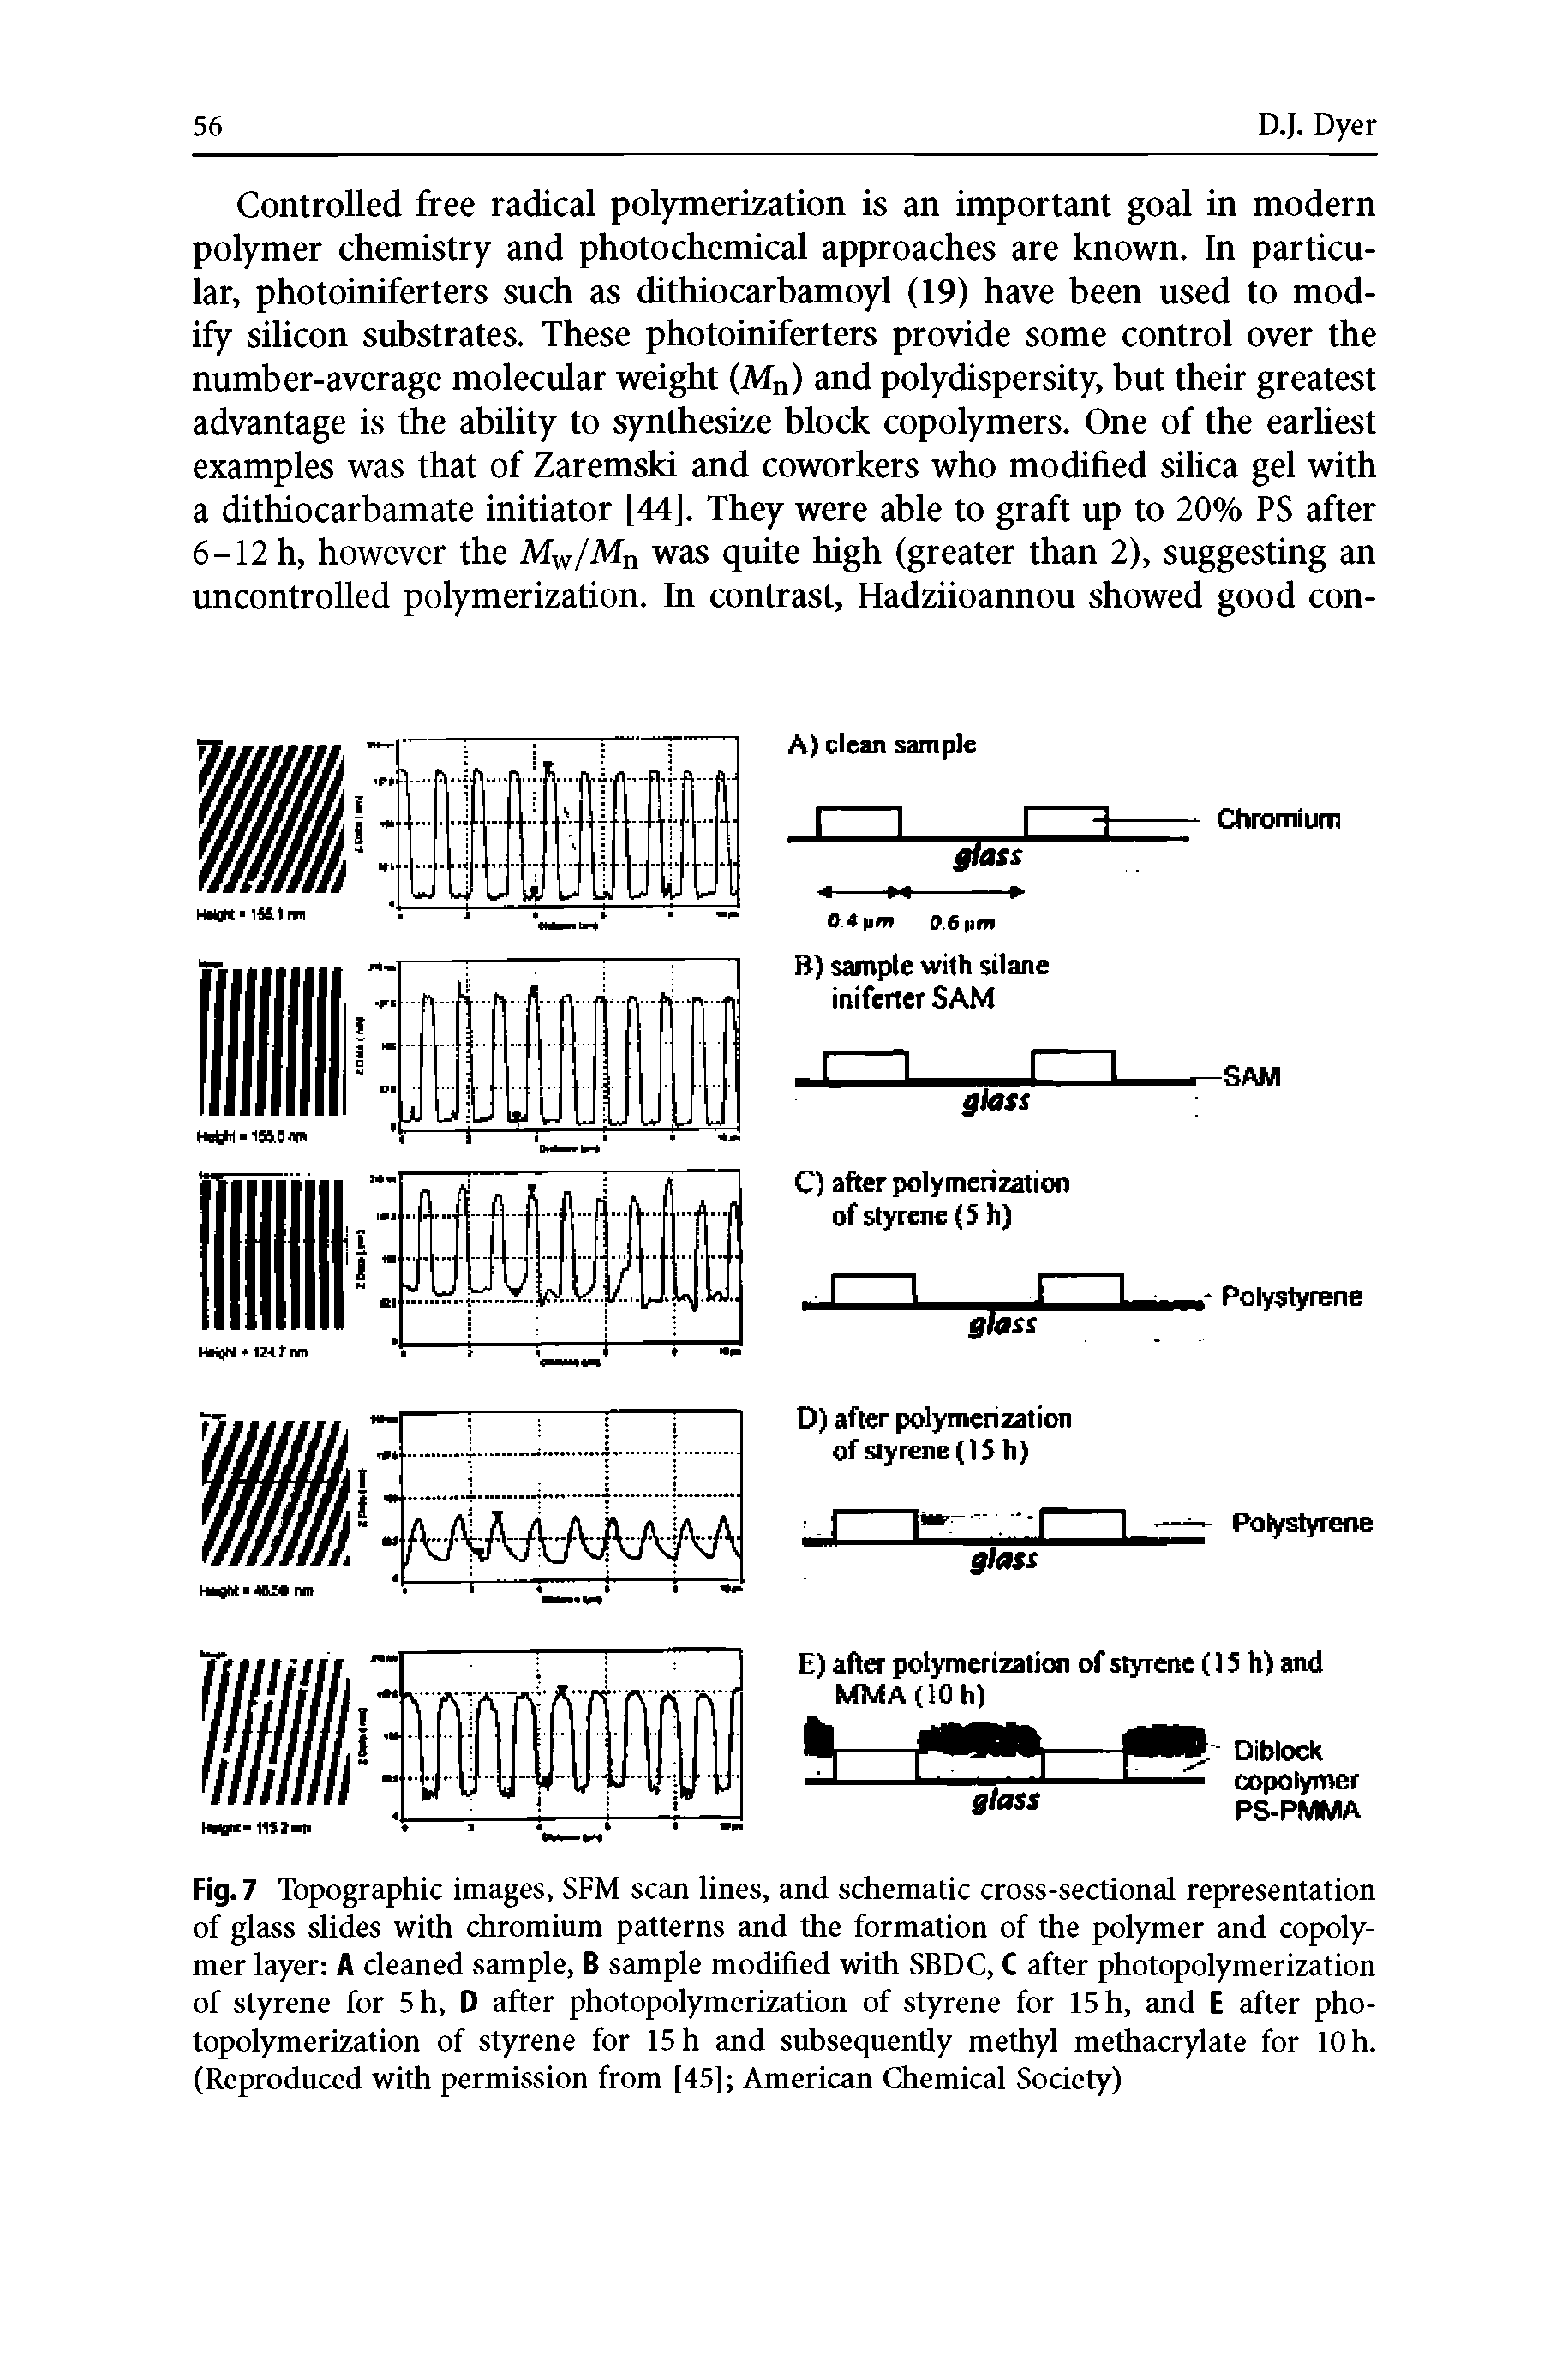 Fig. 7 Topographic images, SFM scan lines, and schematic cross-sectional representation of glass slides with chromium patterns and the formation of the polymer and copolymer layer A cleaned sample, B sample modified with SBDC, C after photopolymerization of styrene for 5h, D after photopolymerization of styrene for 15 h, and E after photopolymerization of styrene for 15 h and subsequently methyl methacrylate for 10 h. (Reproduced with permission from [45] American Chemical Society)...